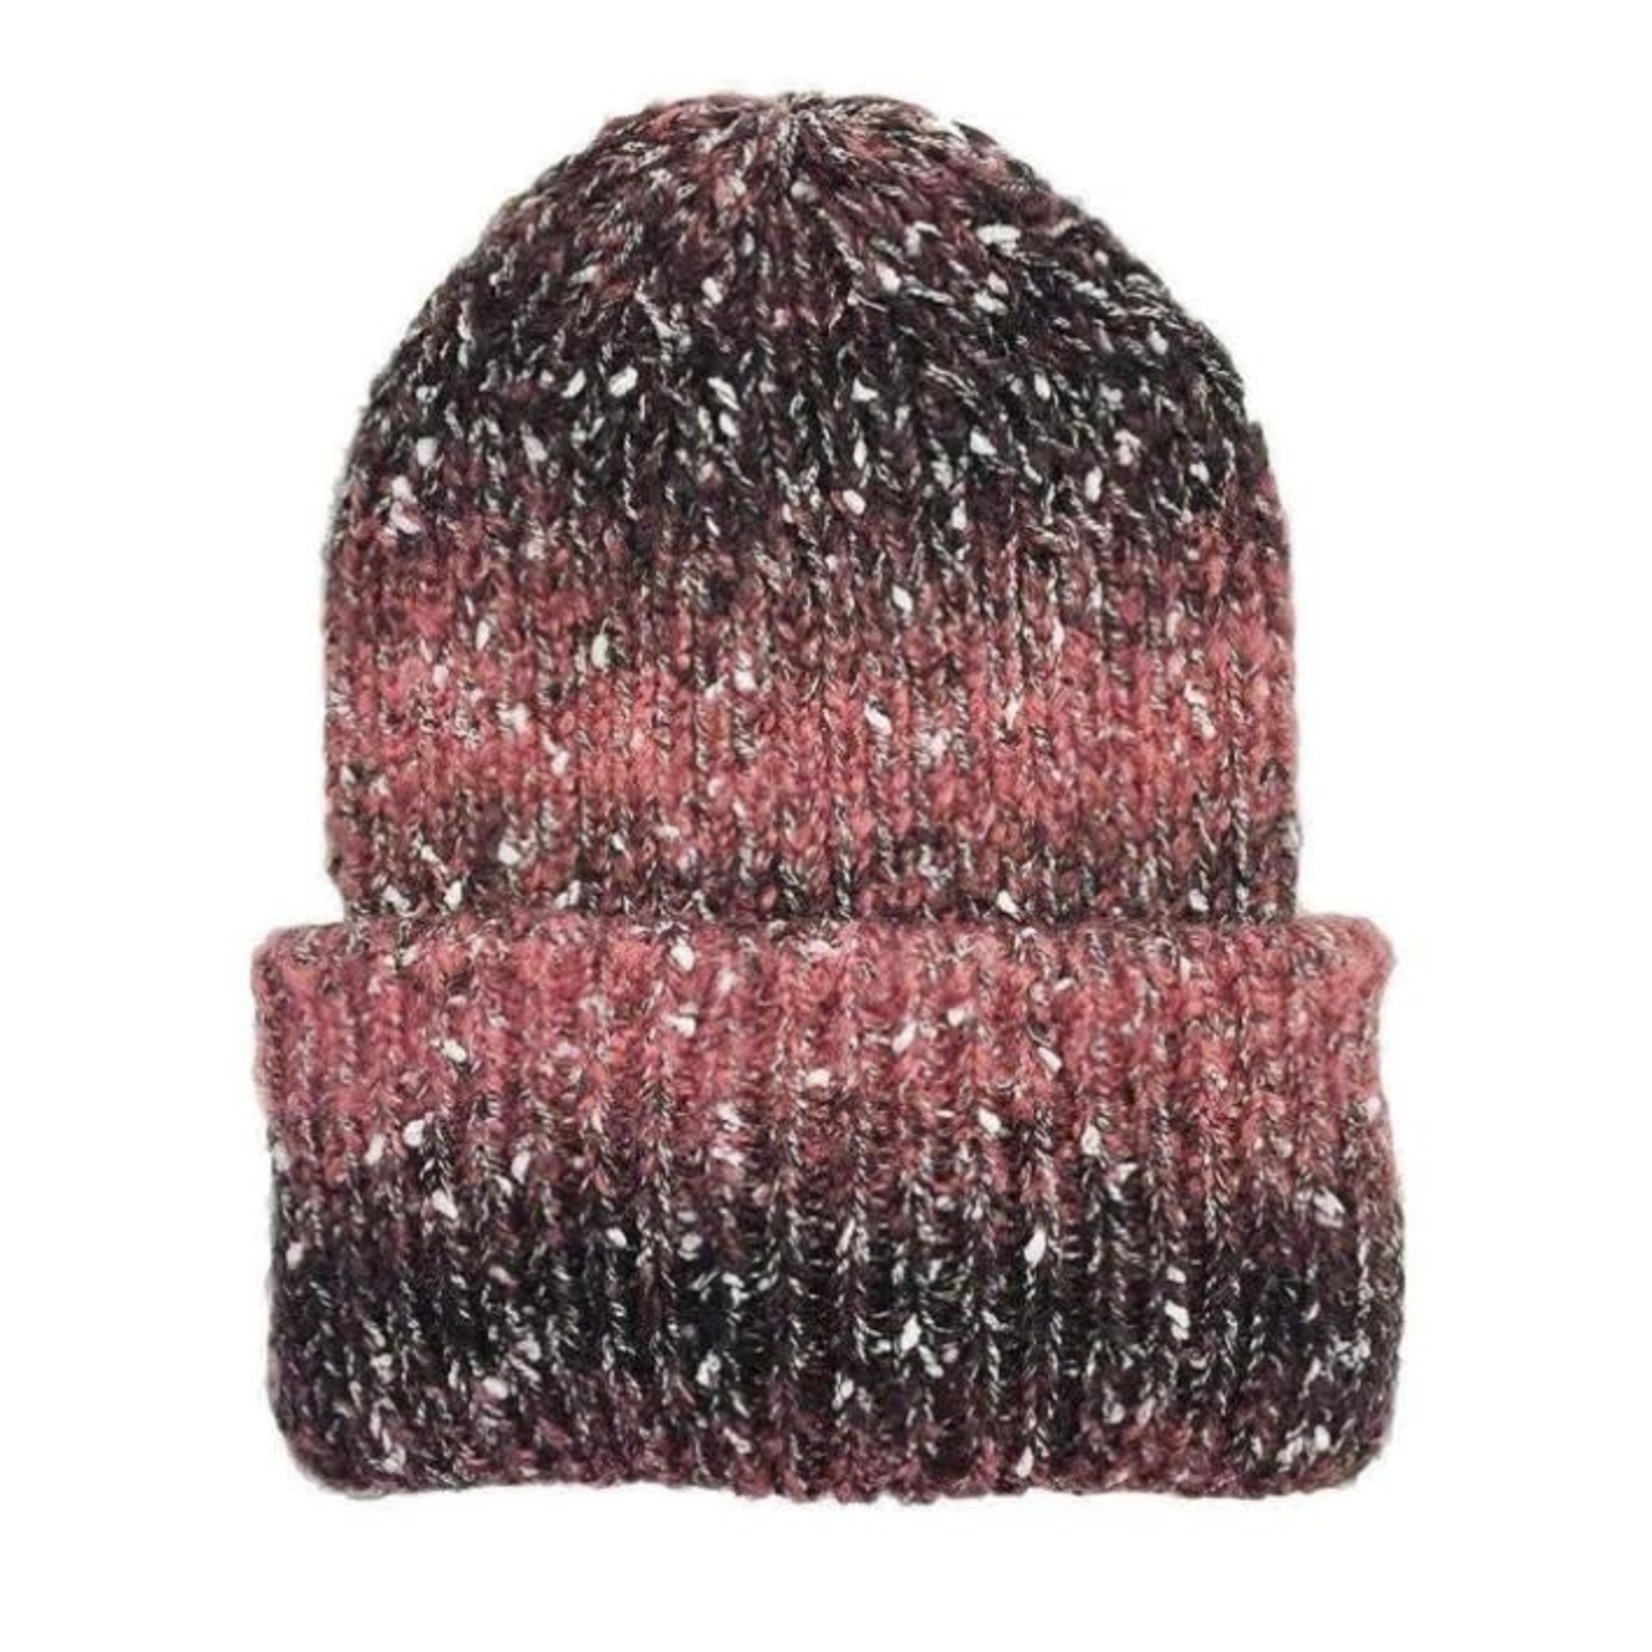 Headcovers Unlimited Headcovers Beanie